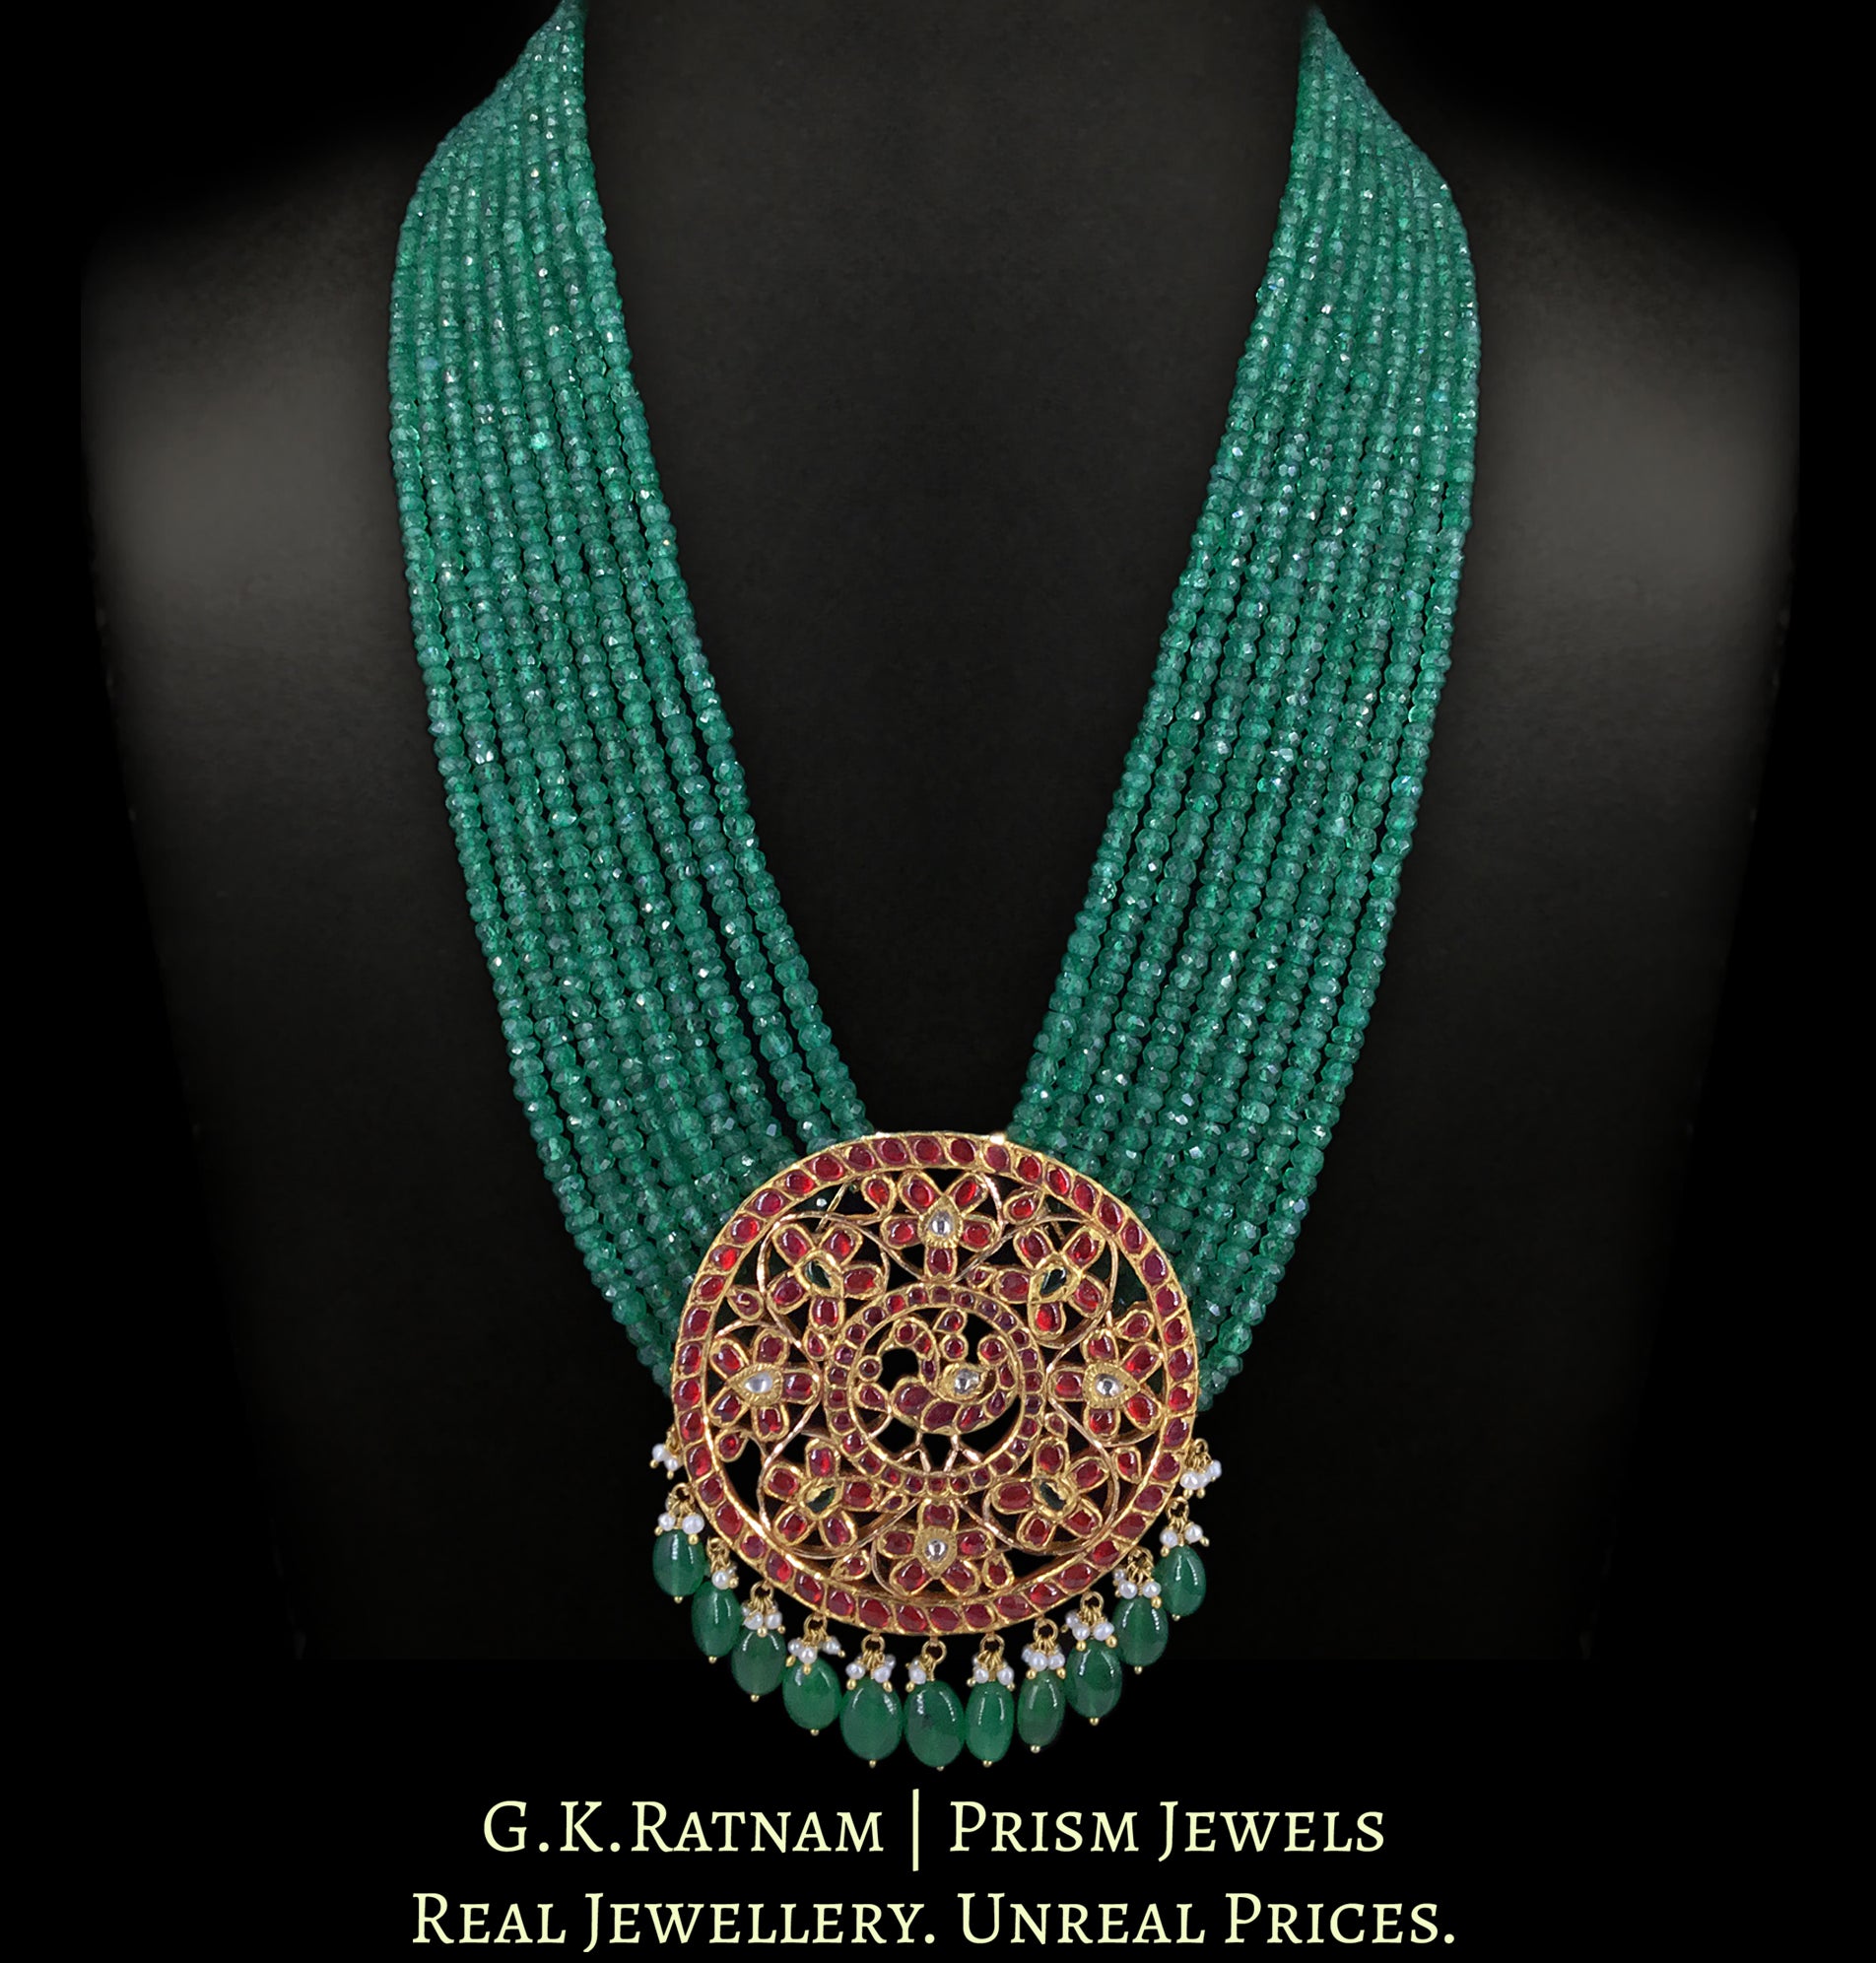 18k Gold and Diamond Polki south-style Round Pendant strung in emerald-grade Green Beryls